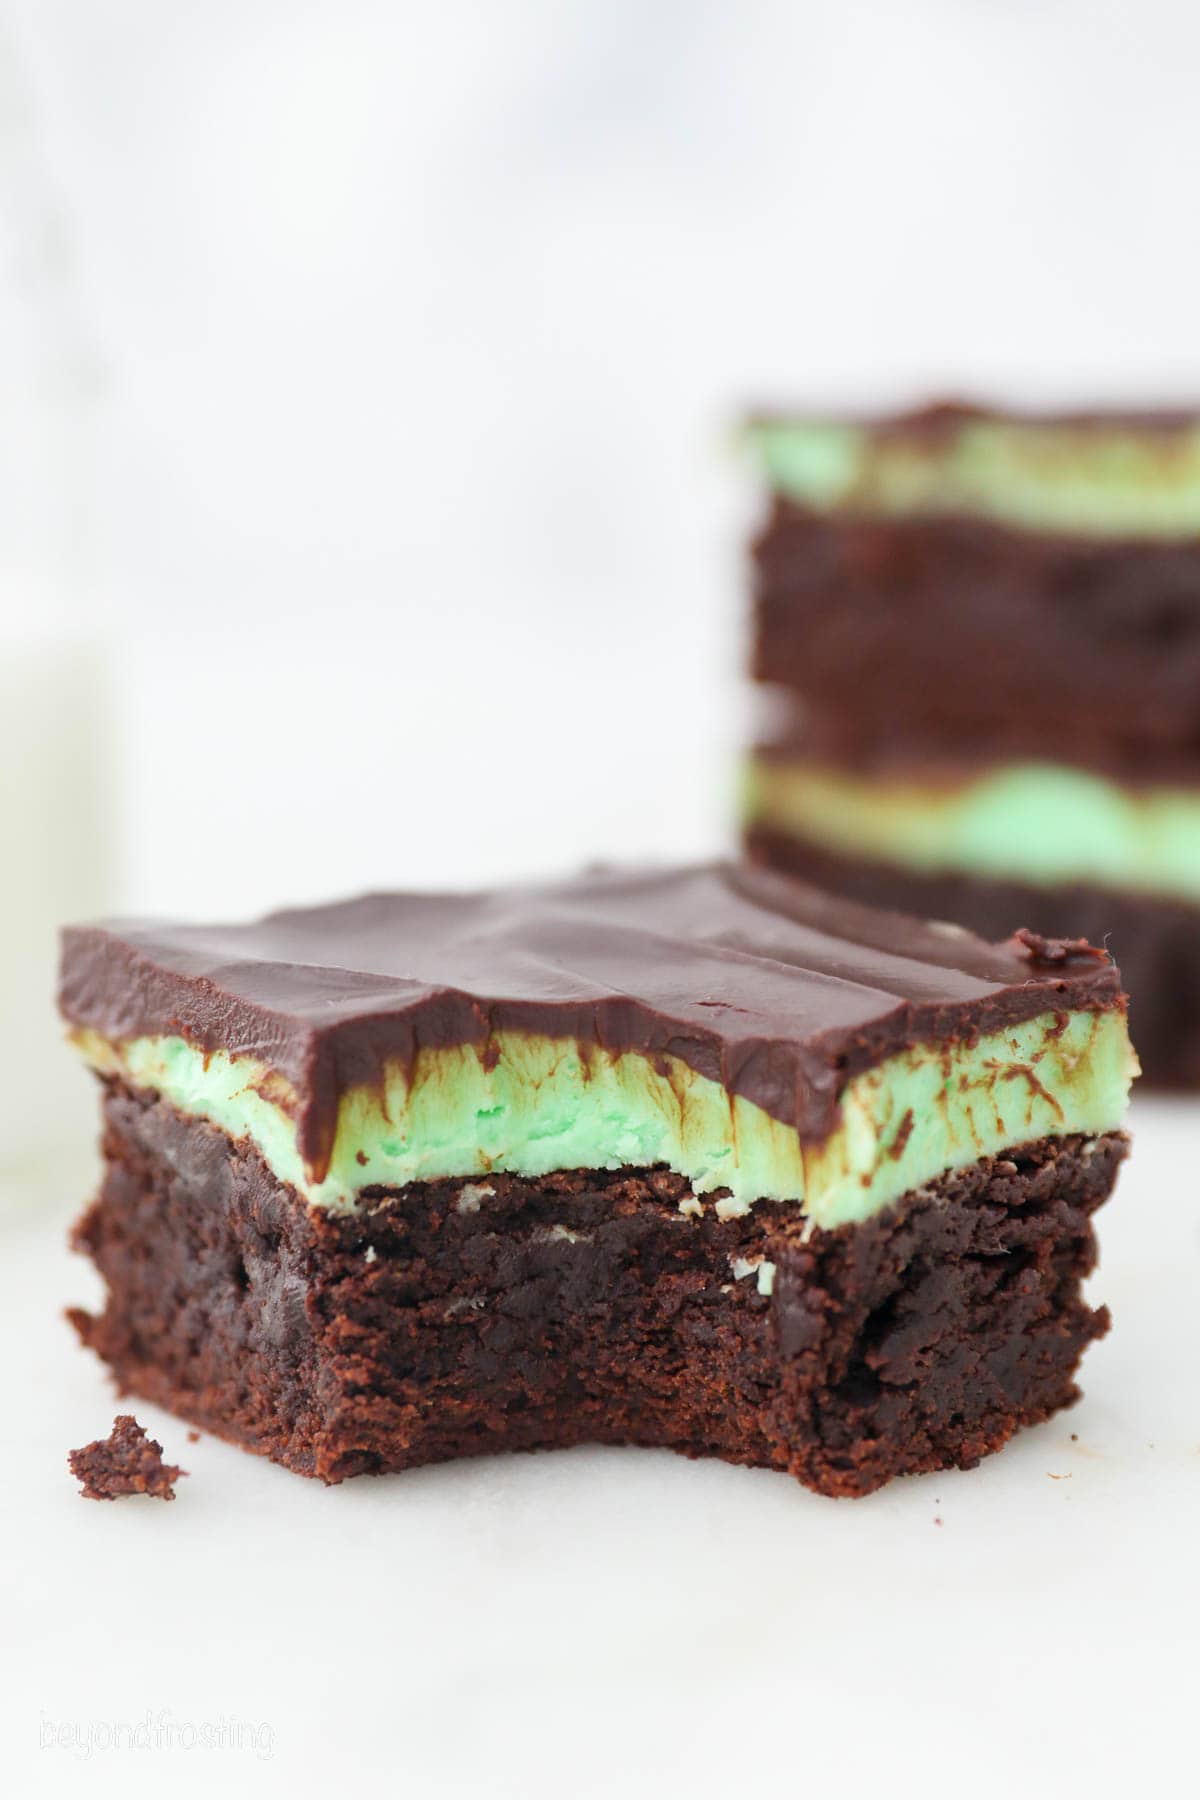 A mint chocolate brownie with a bite missing on a whte countertop.